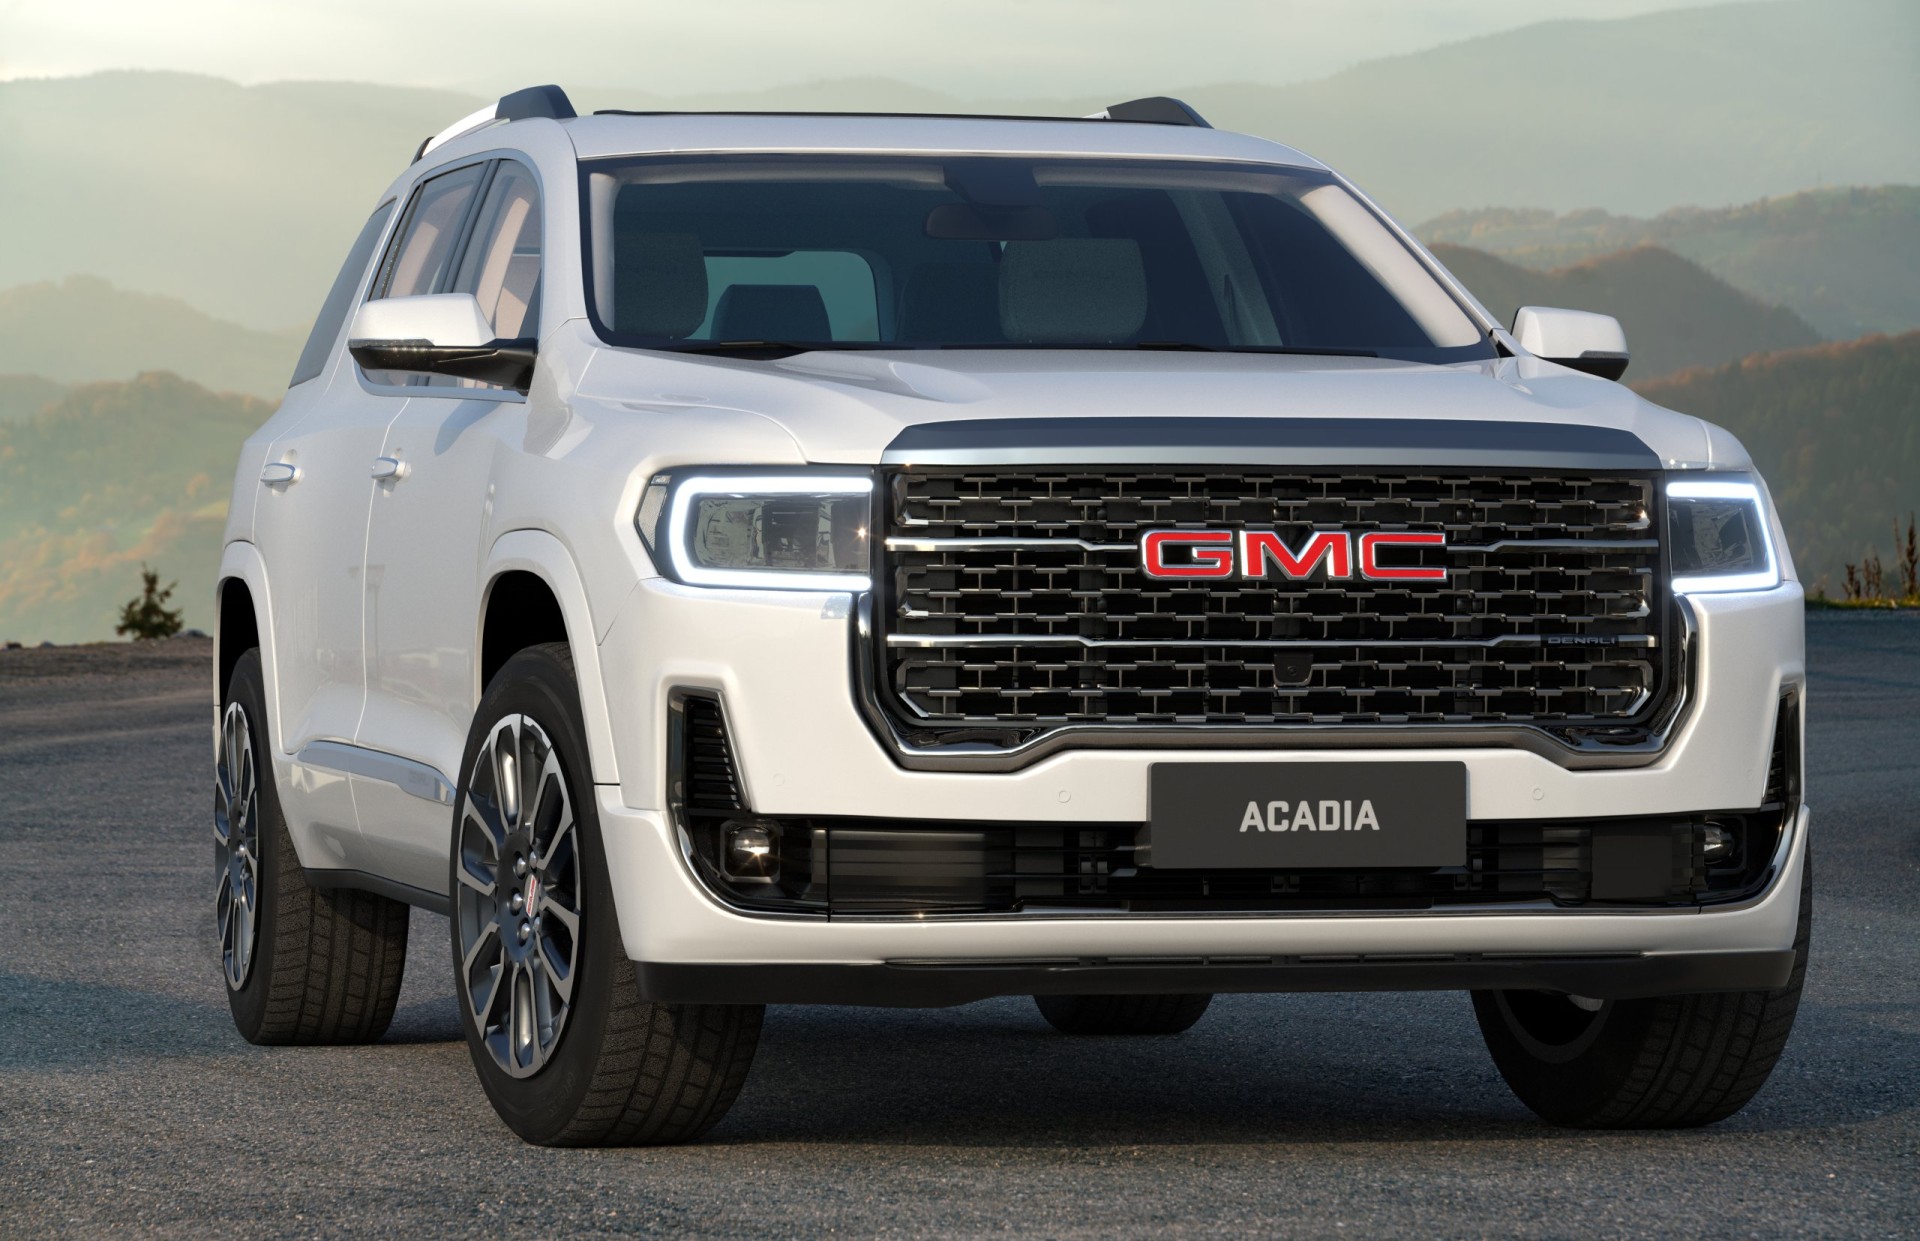 How comfortable is the 2022 GMC Acadia for long family trips?